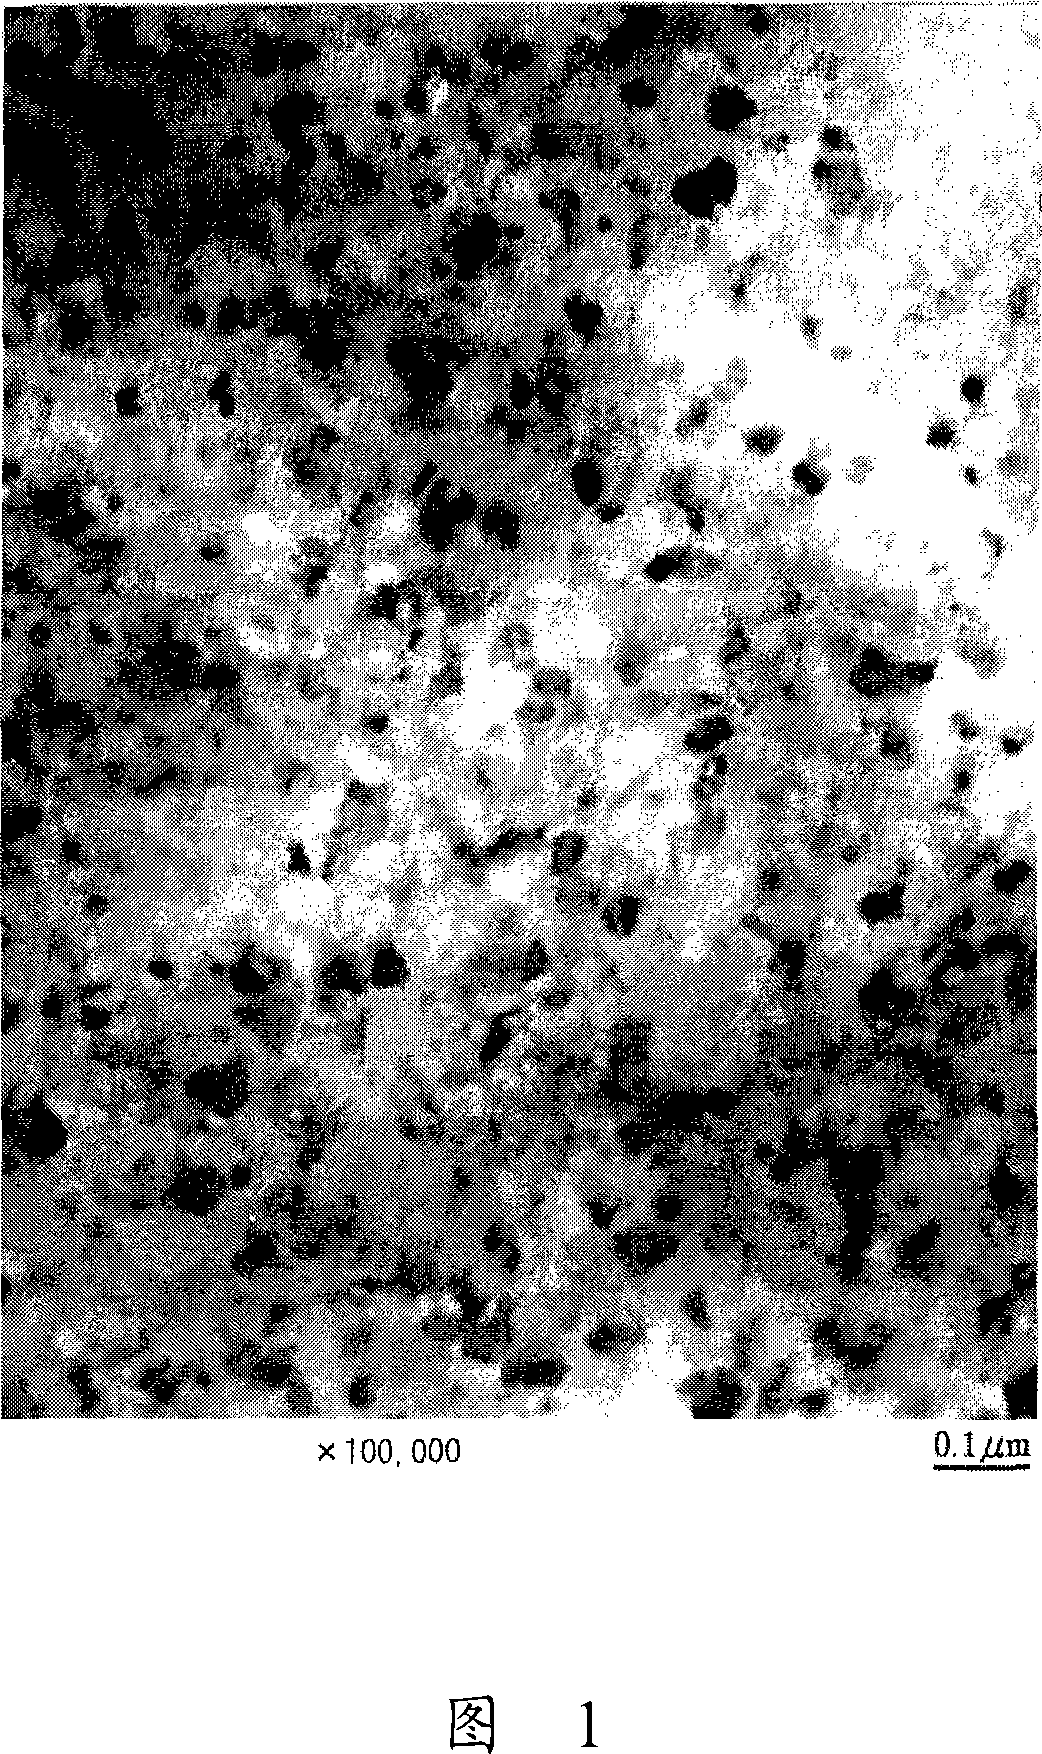 Crystallized glass and method for producing crystallized glass